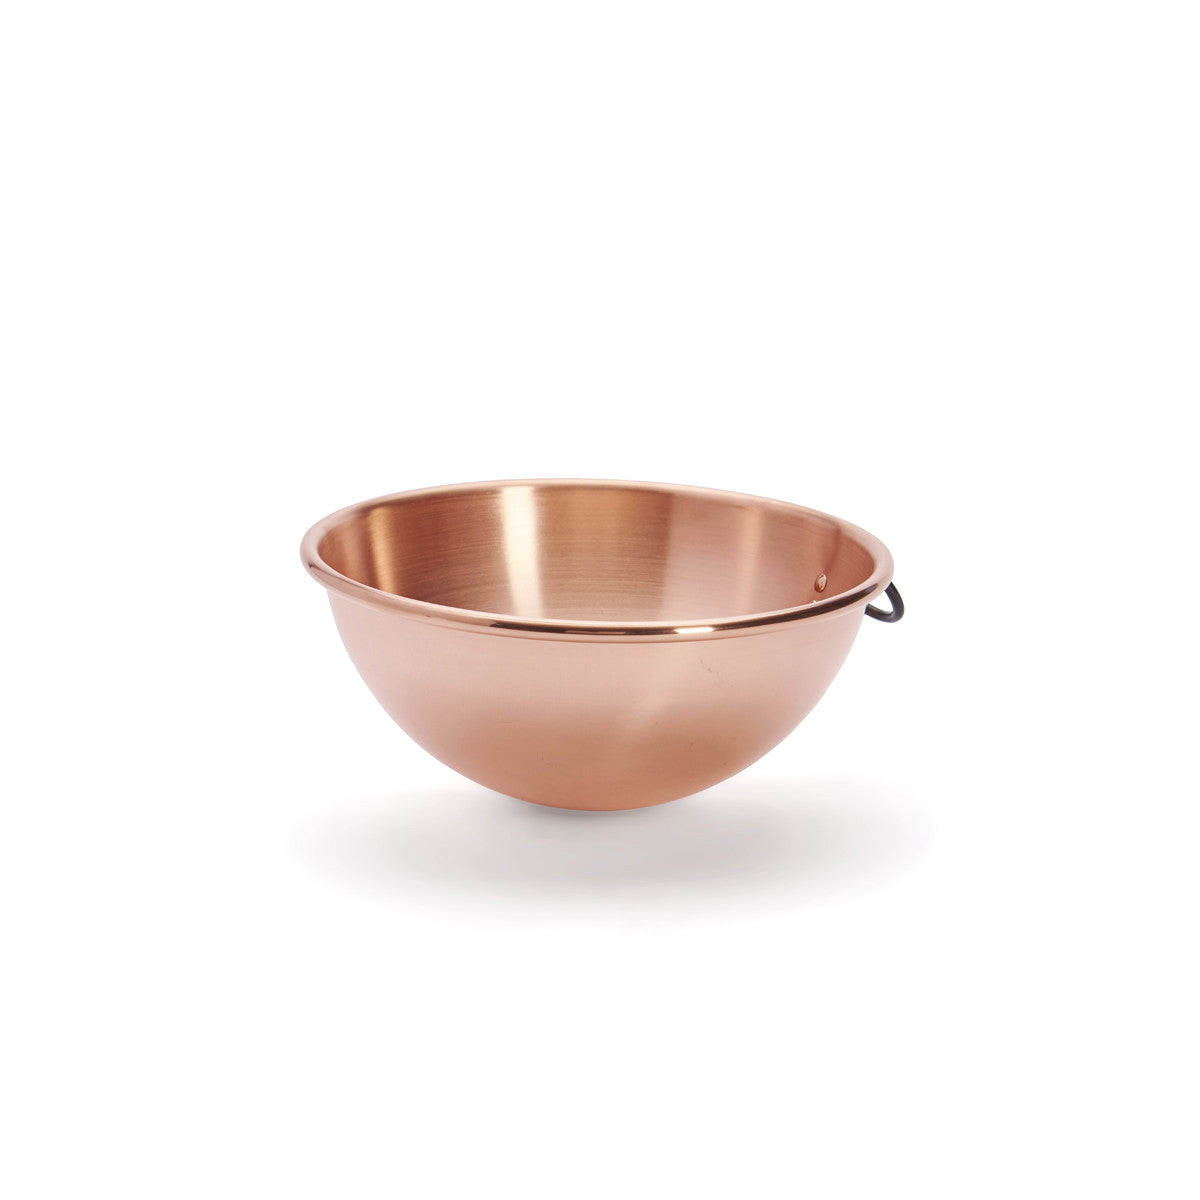 De Buyer copper mixing bowl for egg-whites